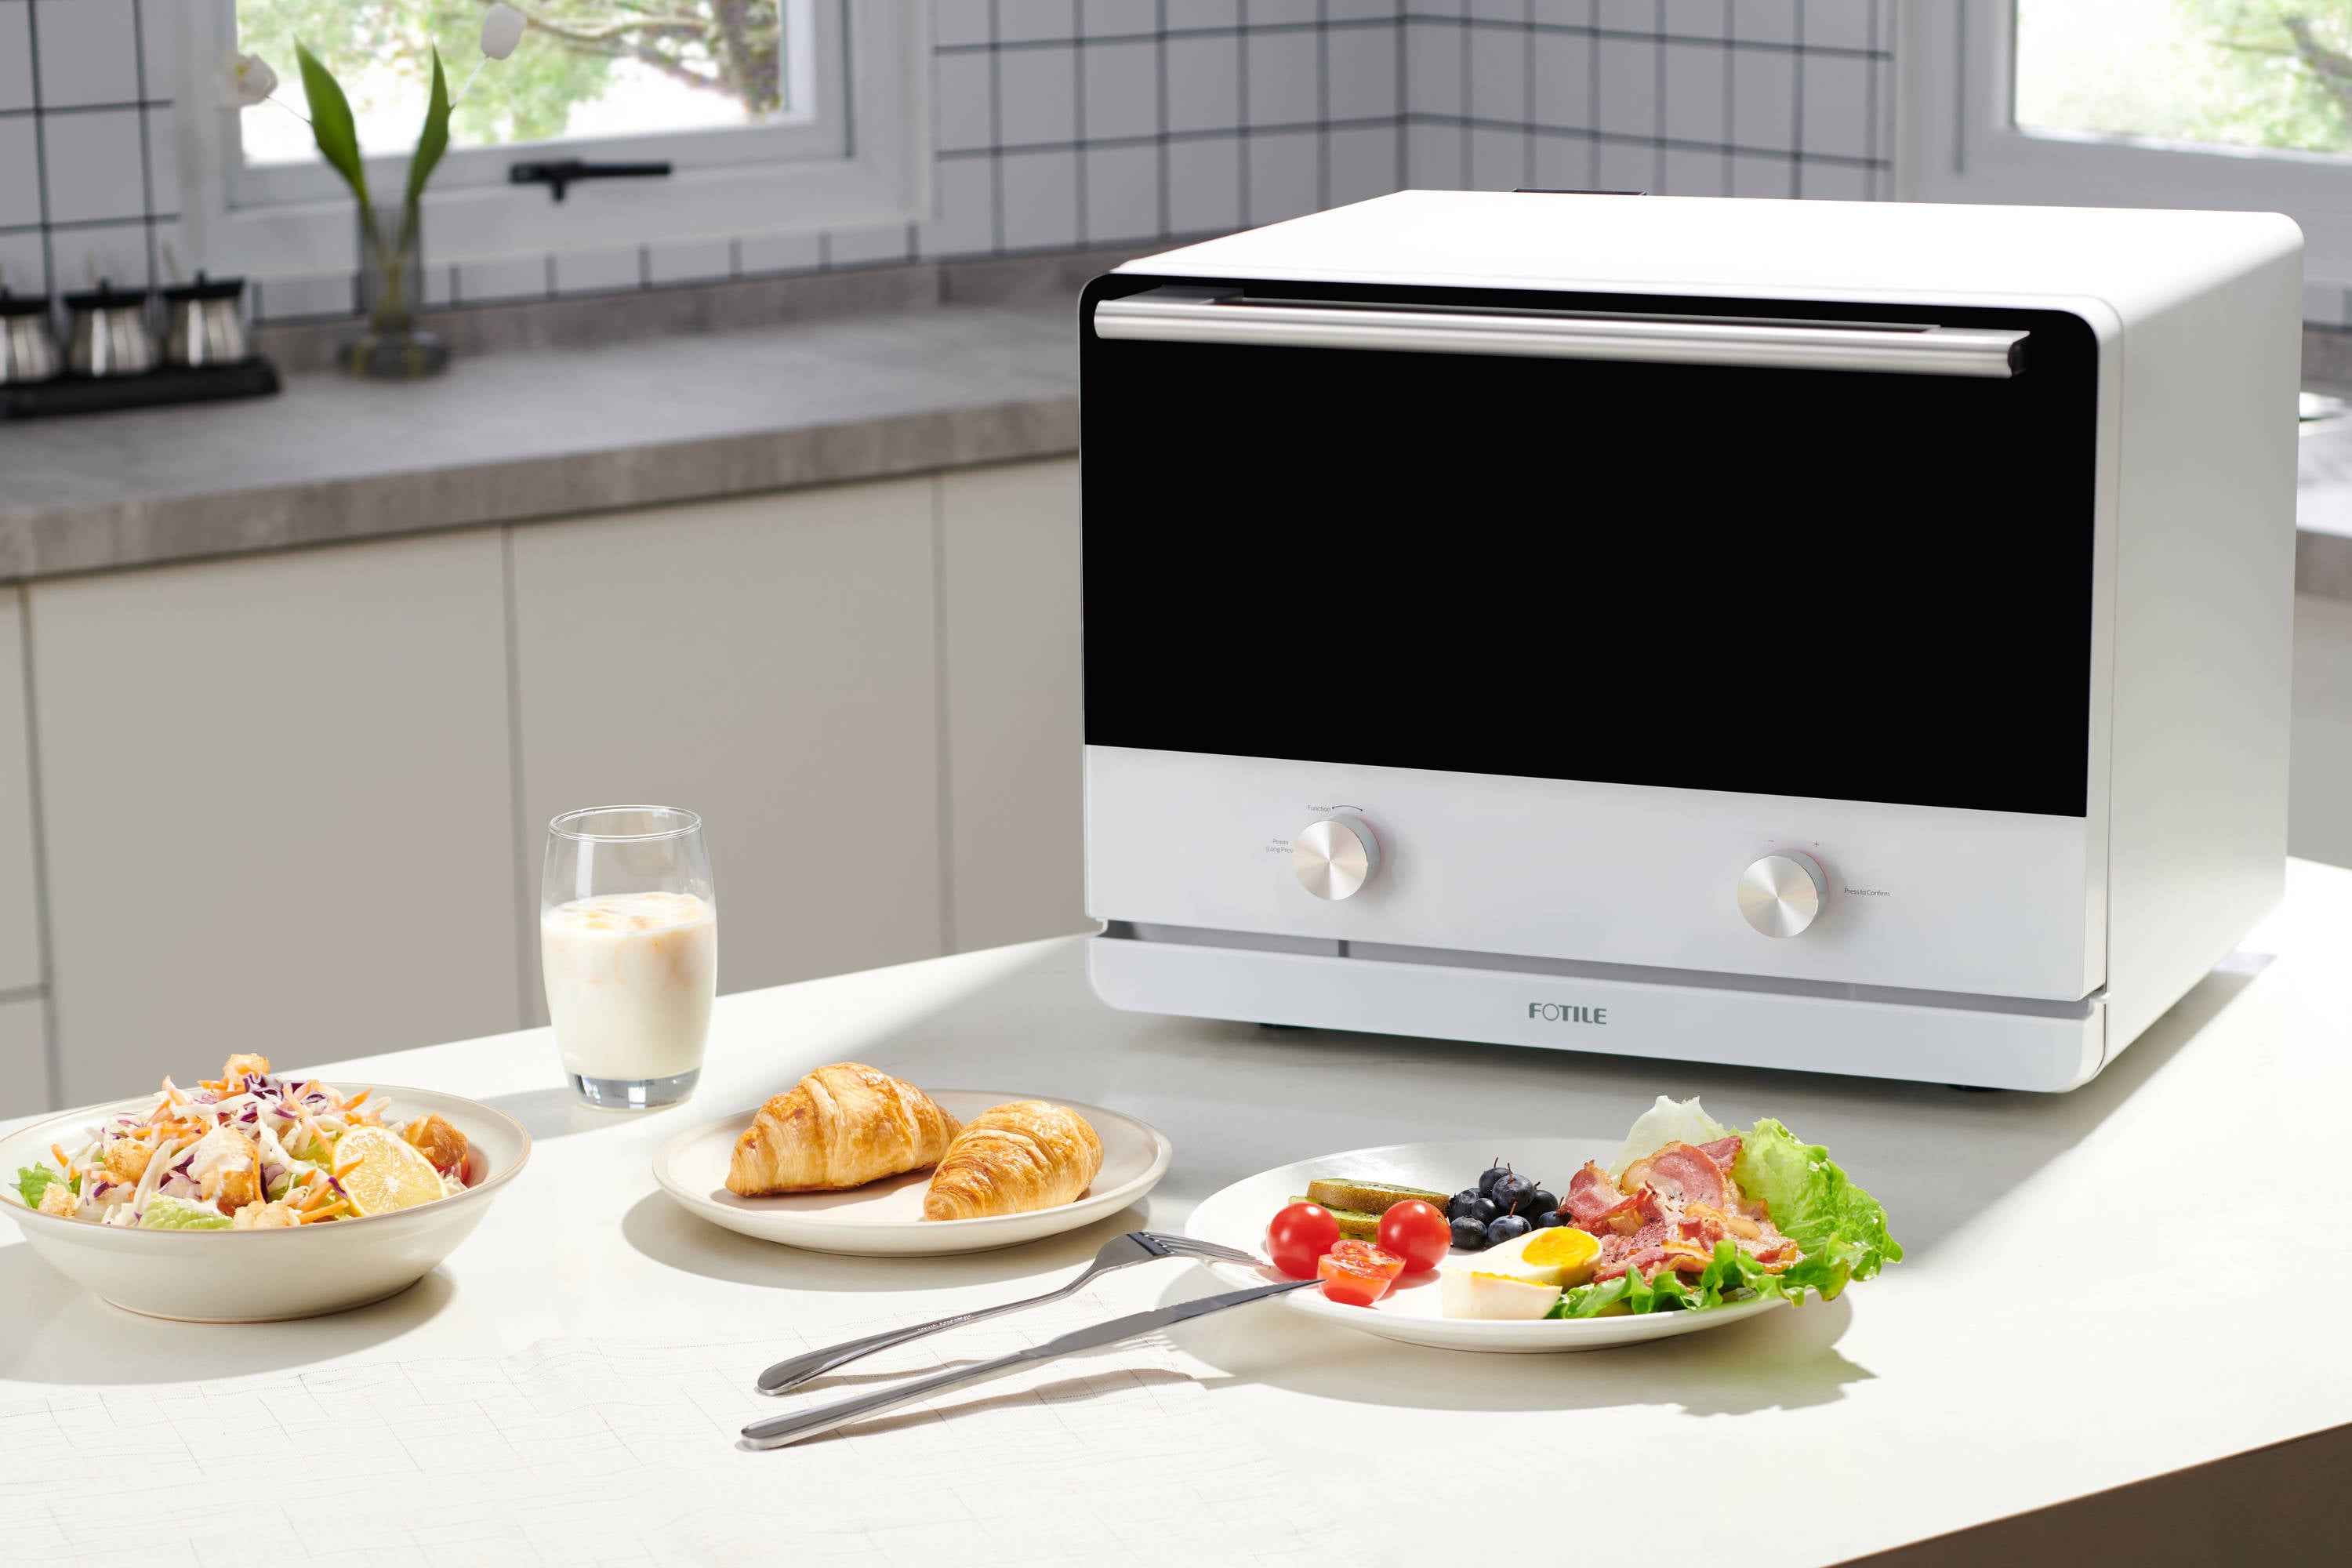 Fotile Chefcubii 4-in-1 Countertop Convection Steam Combi Oven